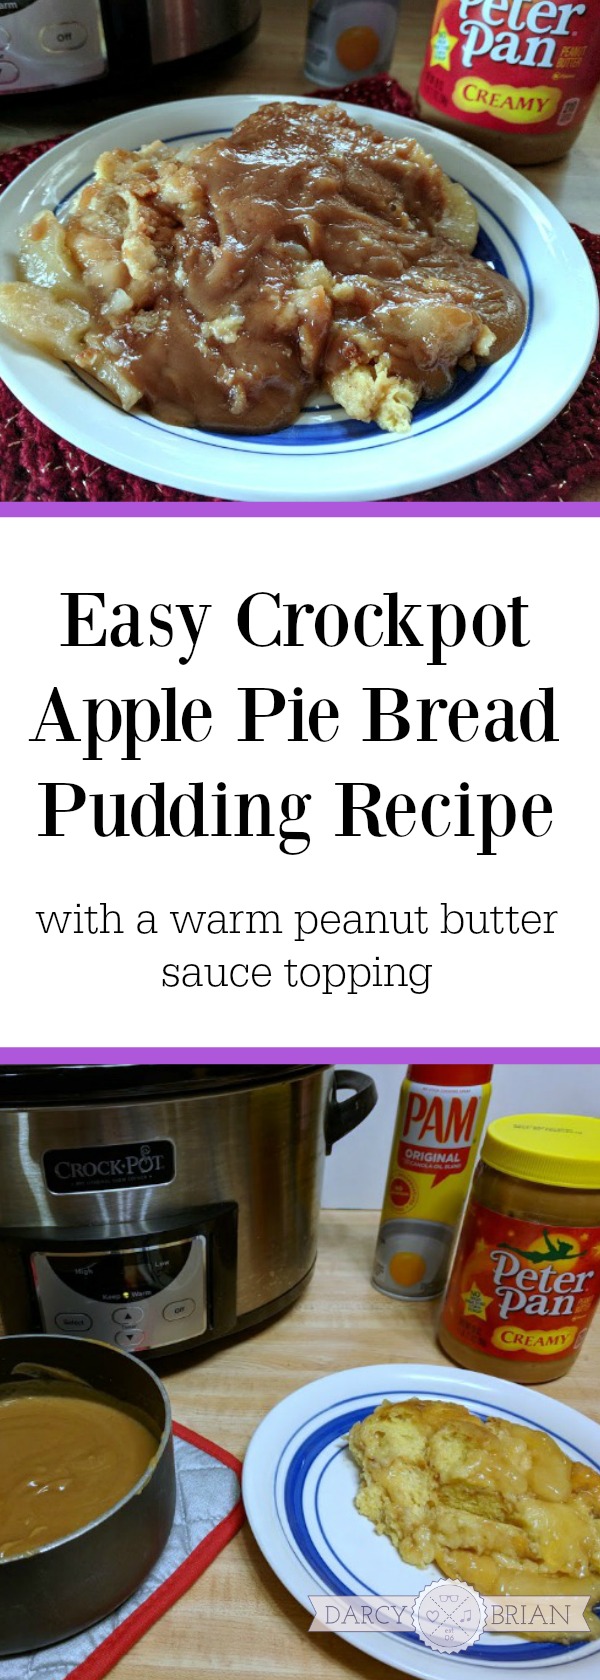 This is so good and so easy to make! Enjoy fall with this easy and delicious Crockpot Apple Pie Bread Pudding Recipe with a warm peanut butter sauce. The perfect fall slow cooker dessert! {AD} #RecipesThatCrock #SeasonalSolutions #CollectiveBias #crockpot #slowcooker #applerecipes #falldesserts #fallbreakfast